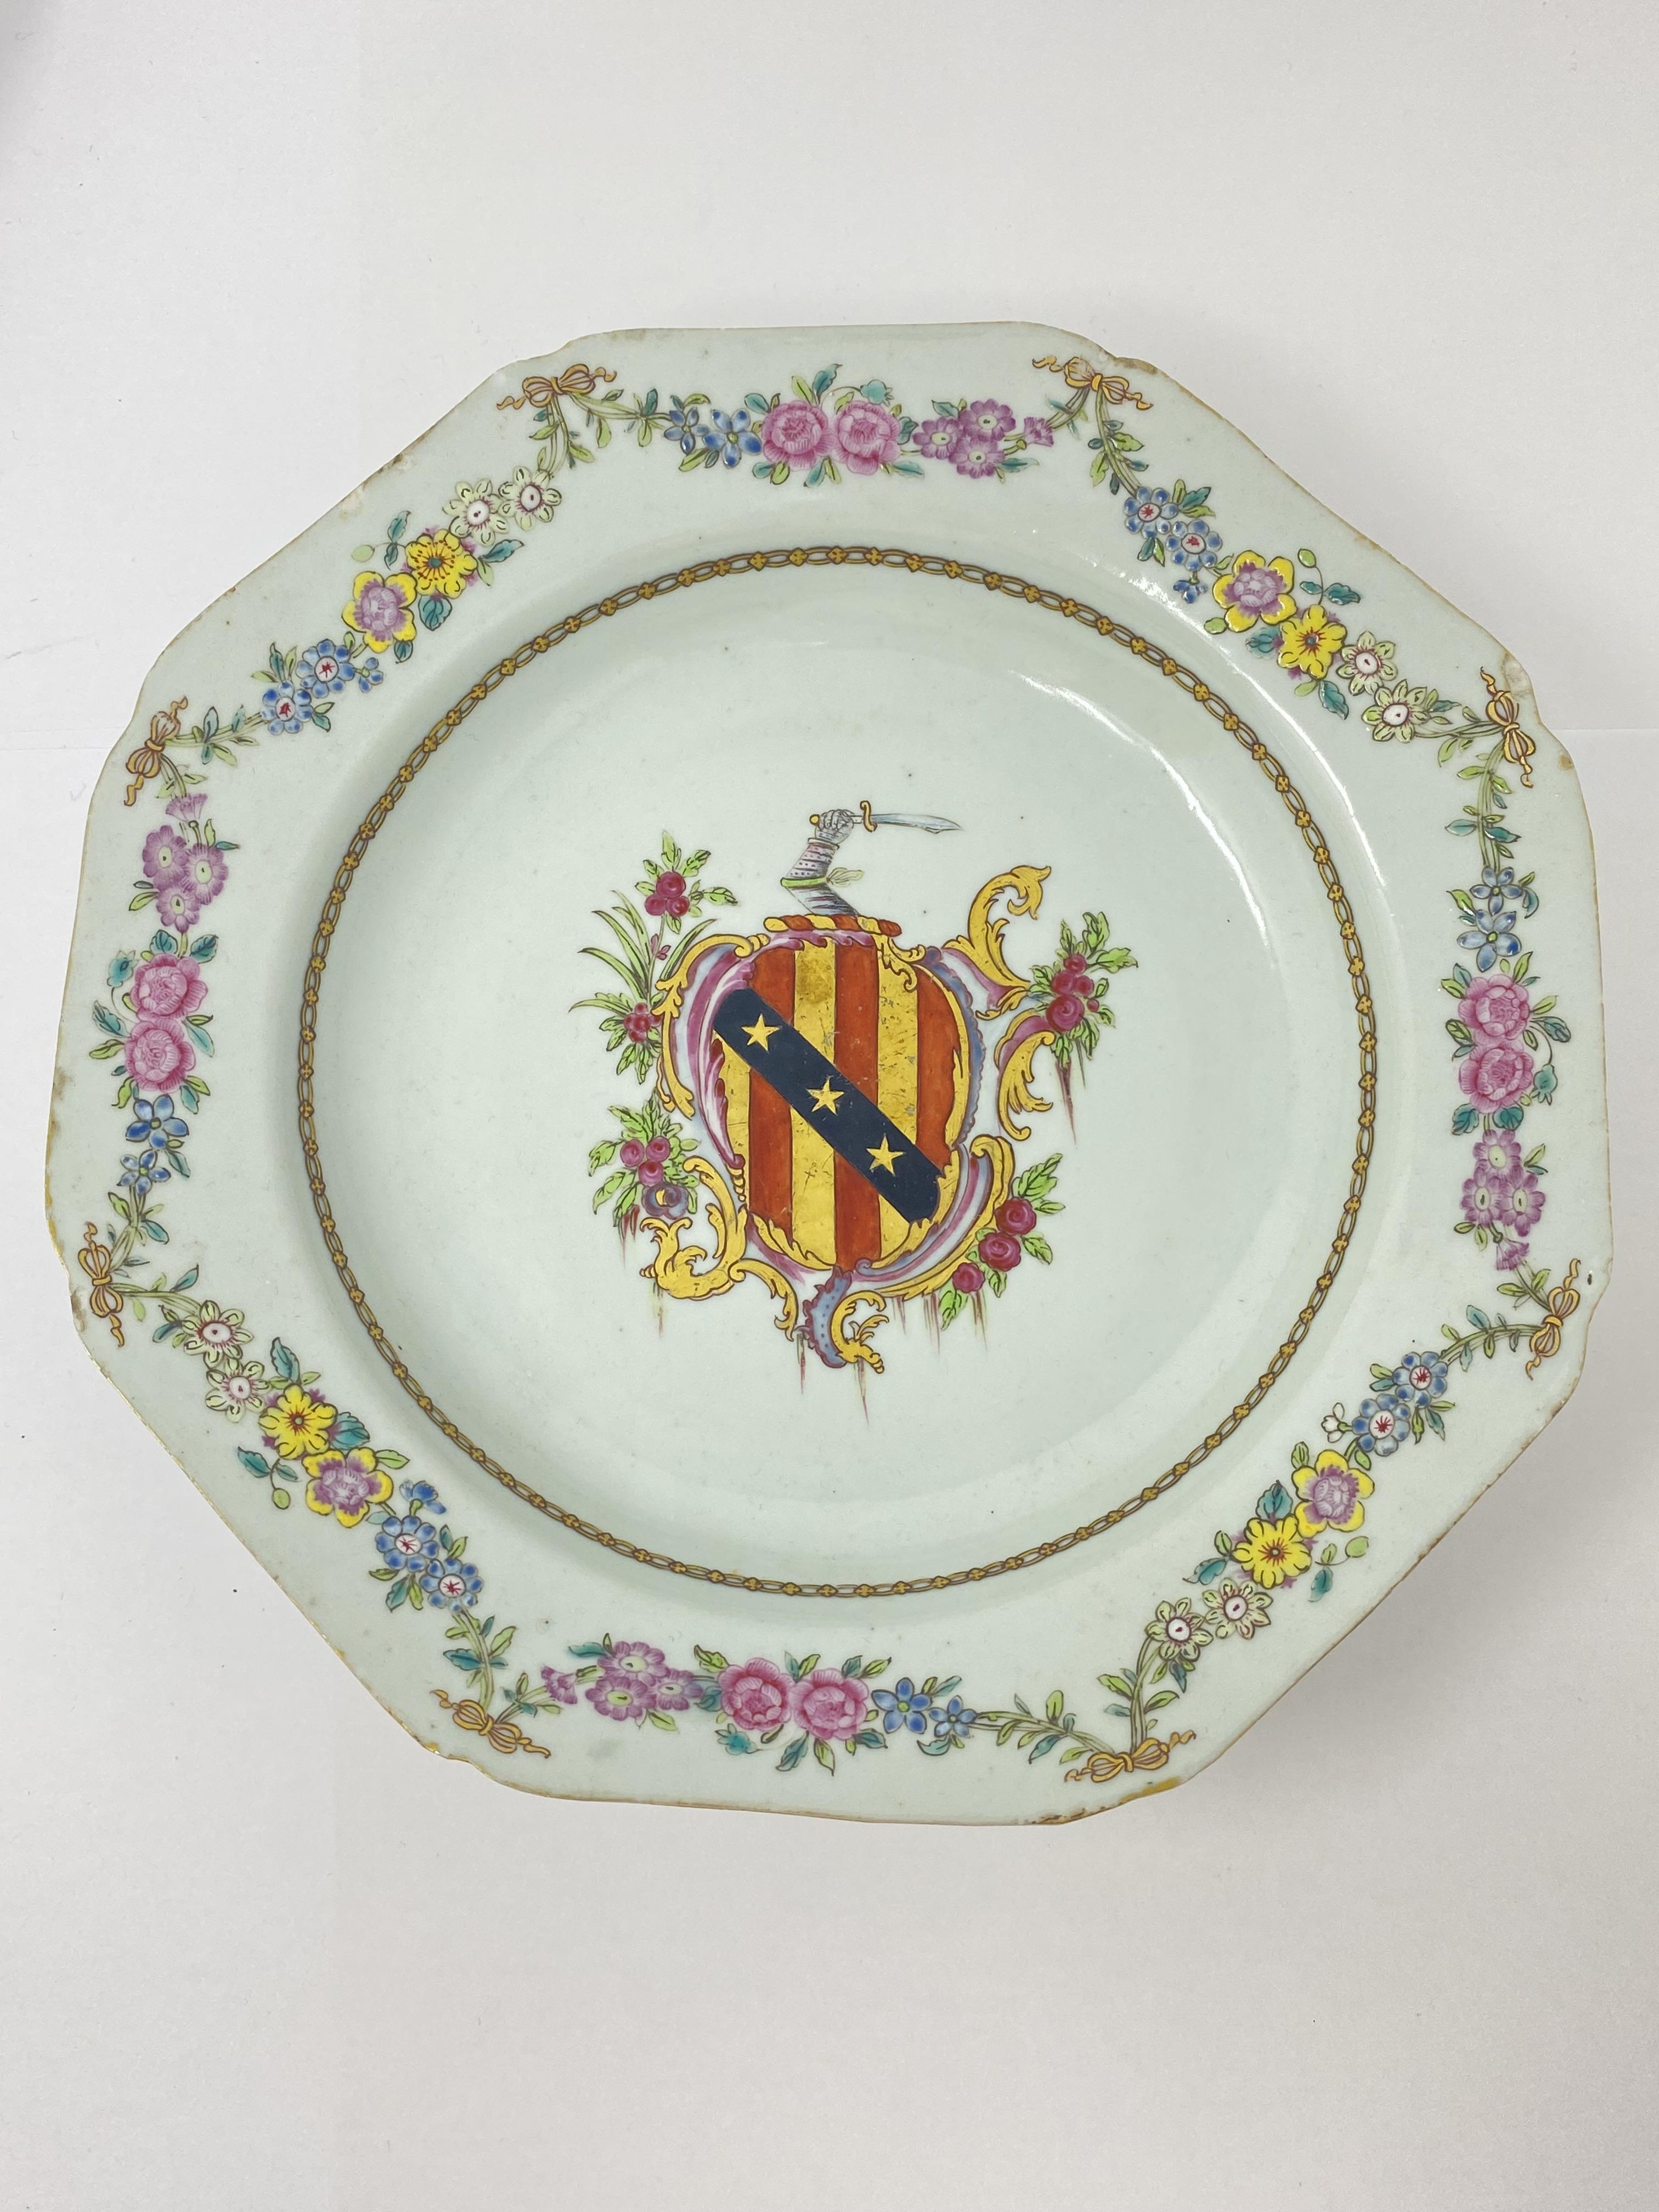 FOUR CHINESE EXPORT FAMILLE-ROSE ARMORIAL PORCELAINS, 18TH CENTURY - Image 10 of 13